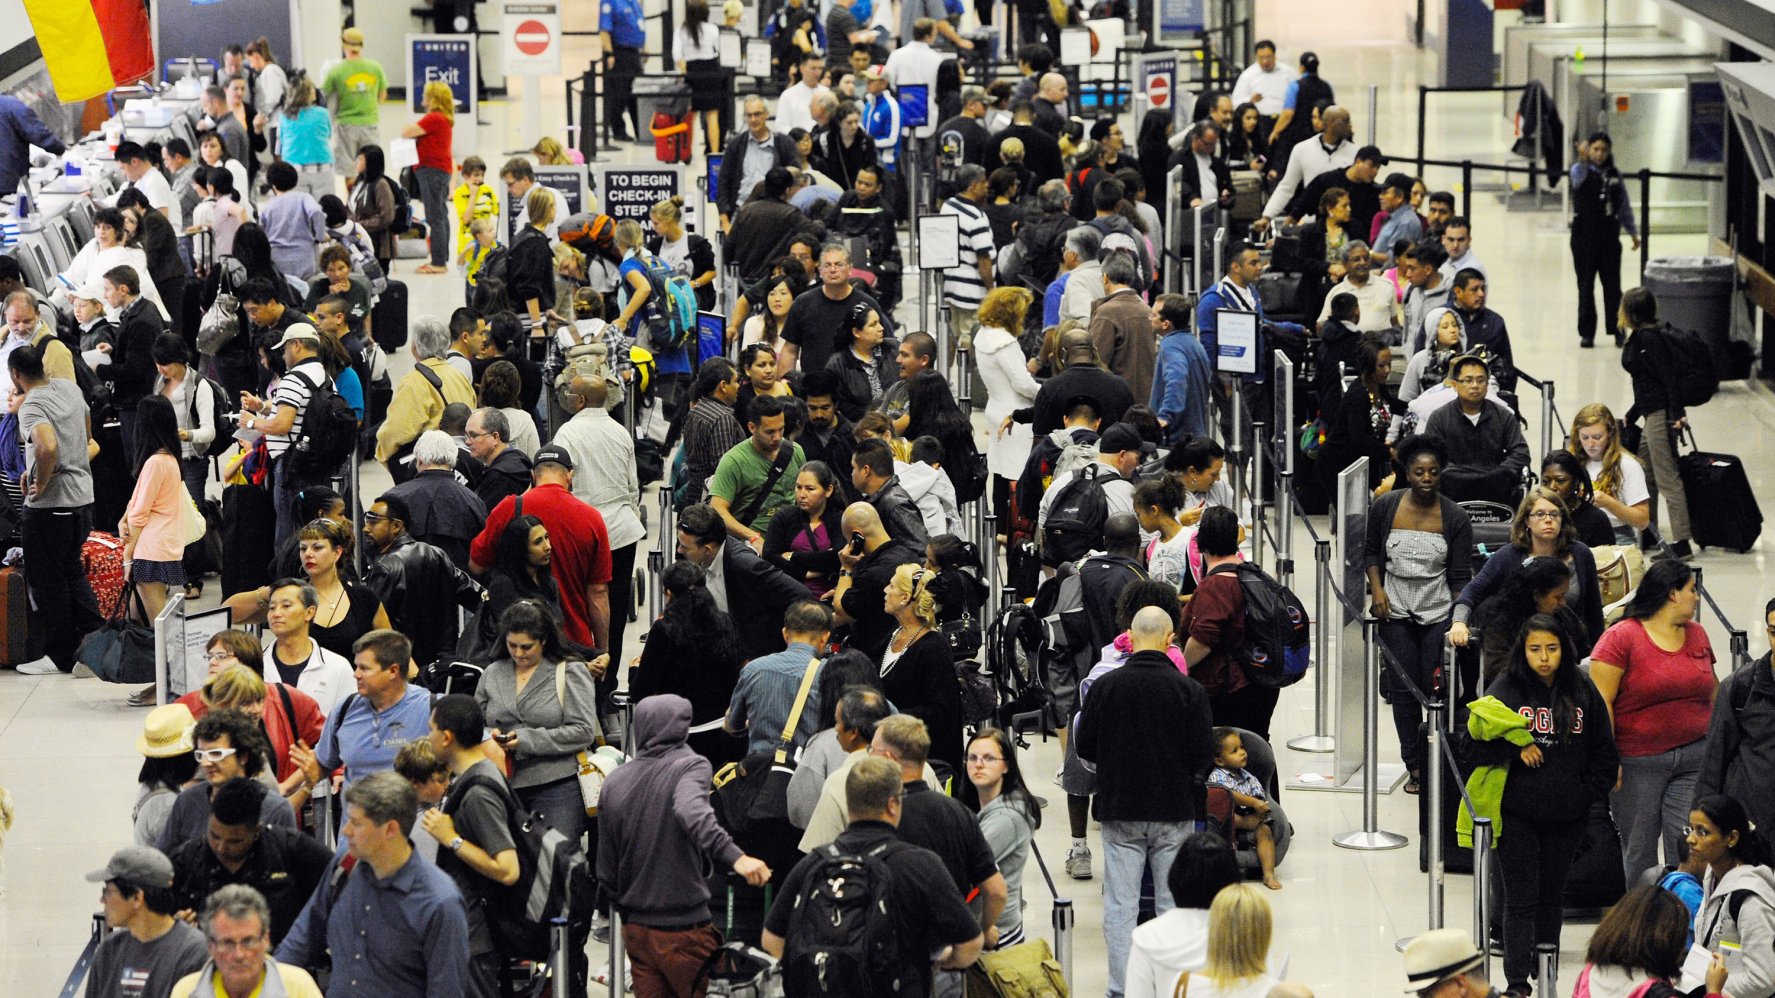 What are peak hours at LAX?